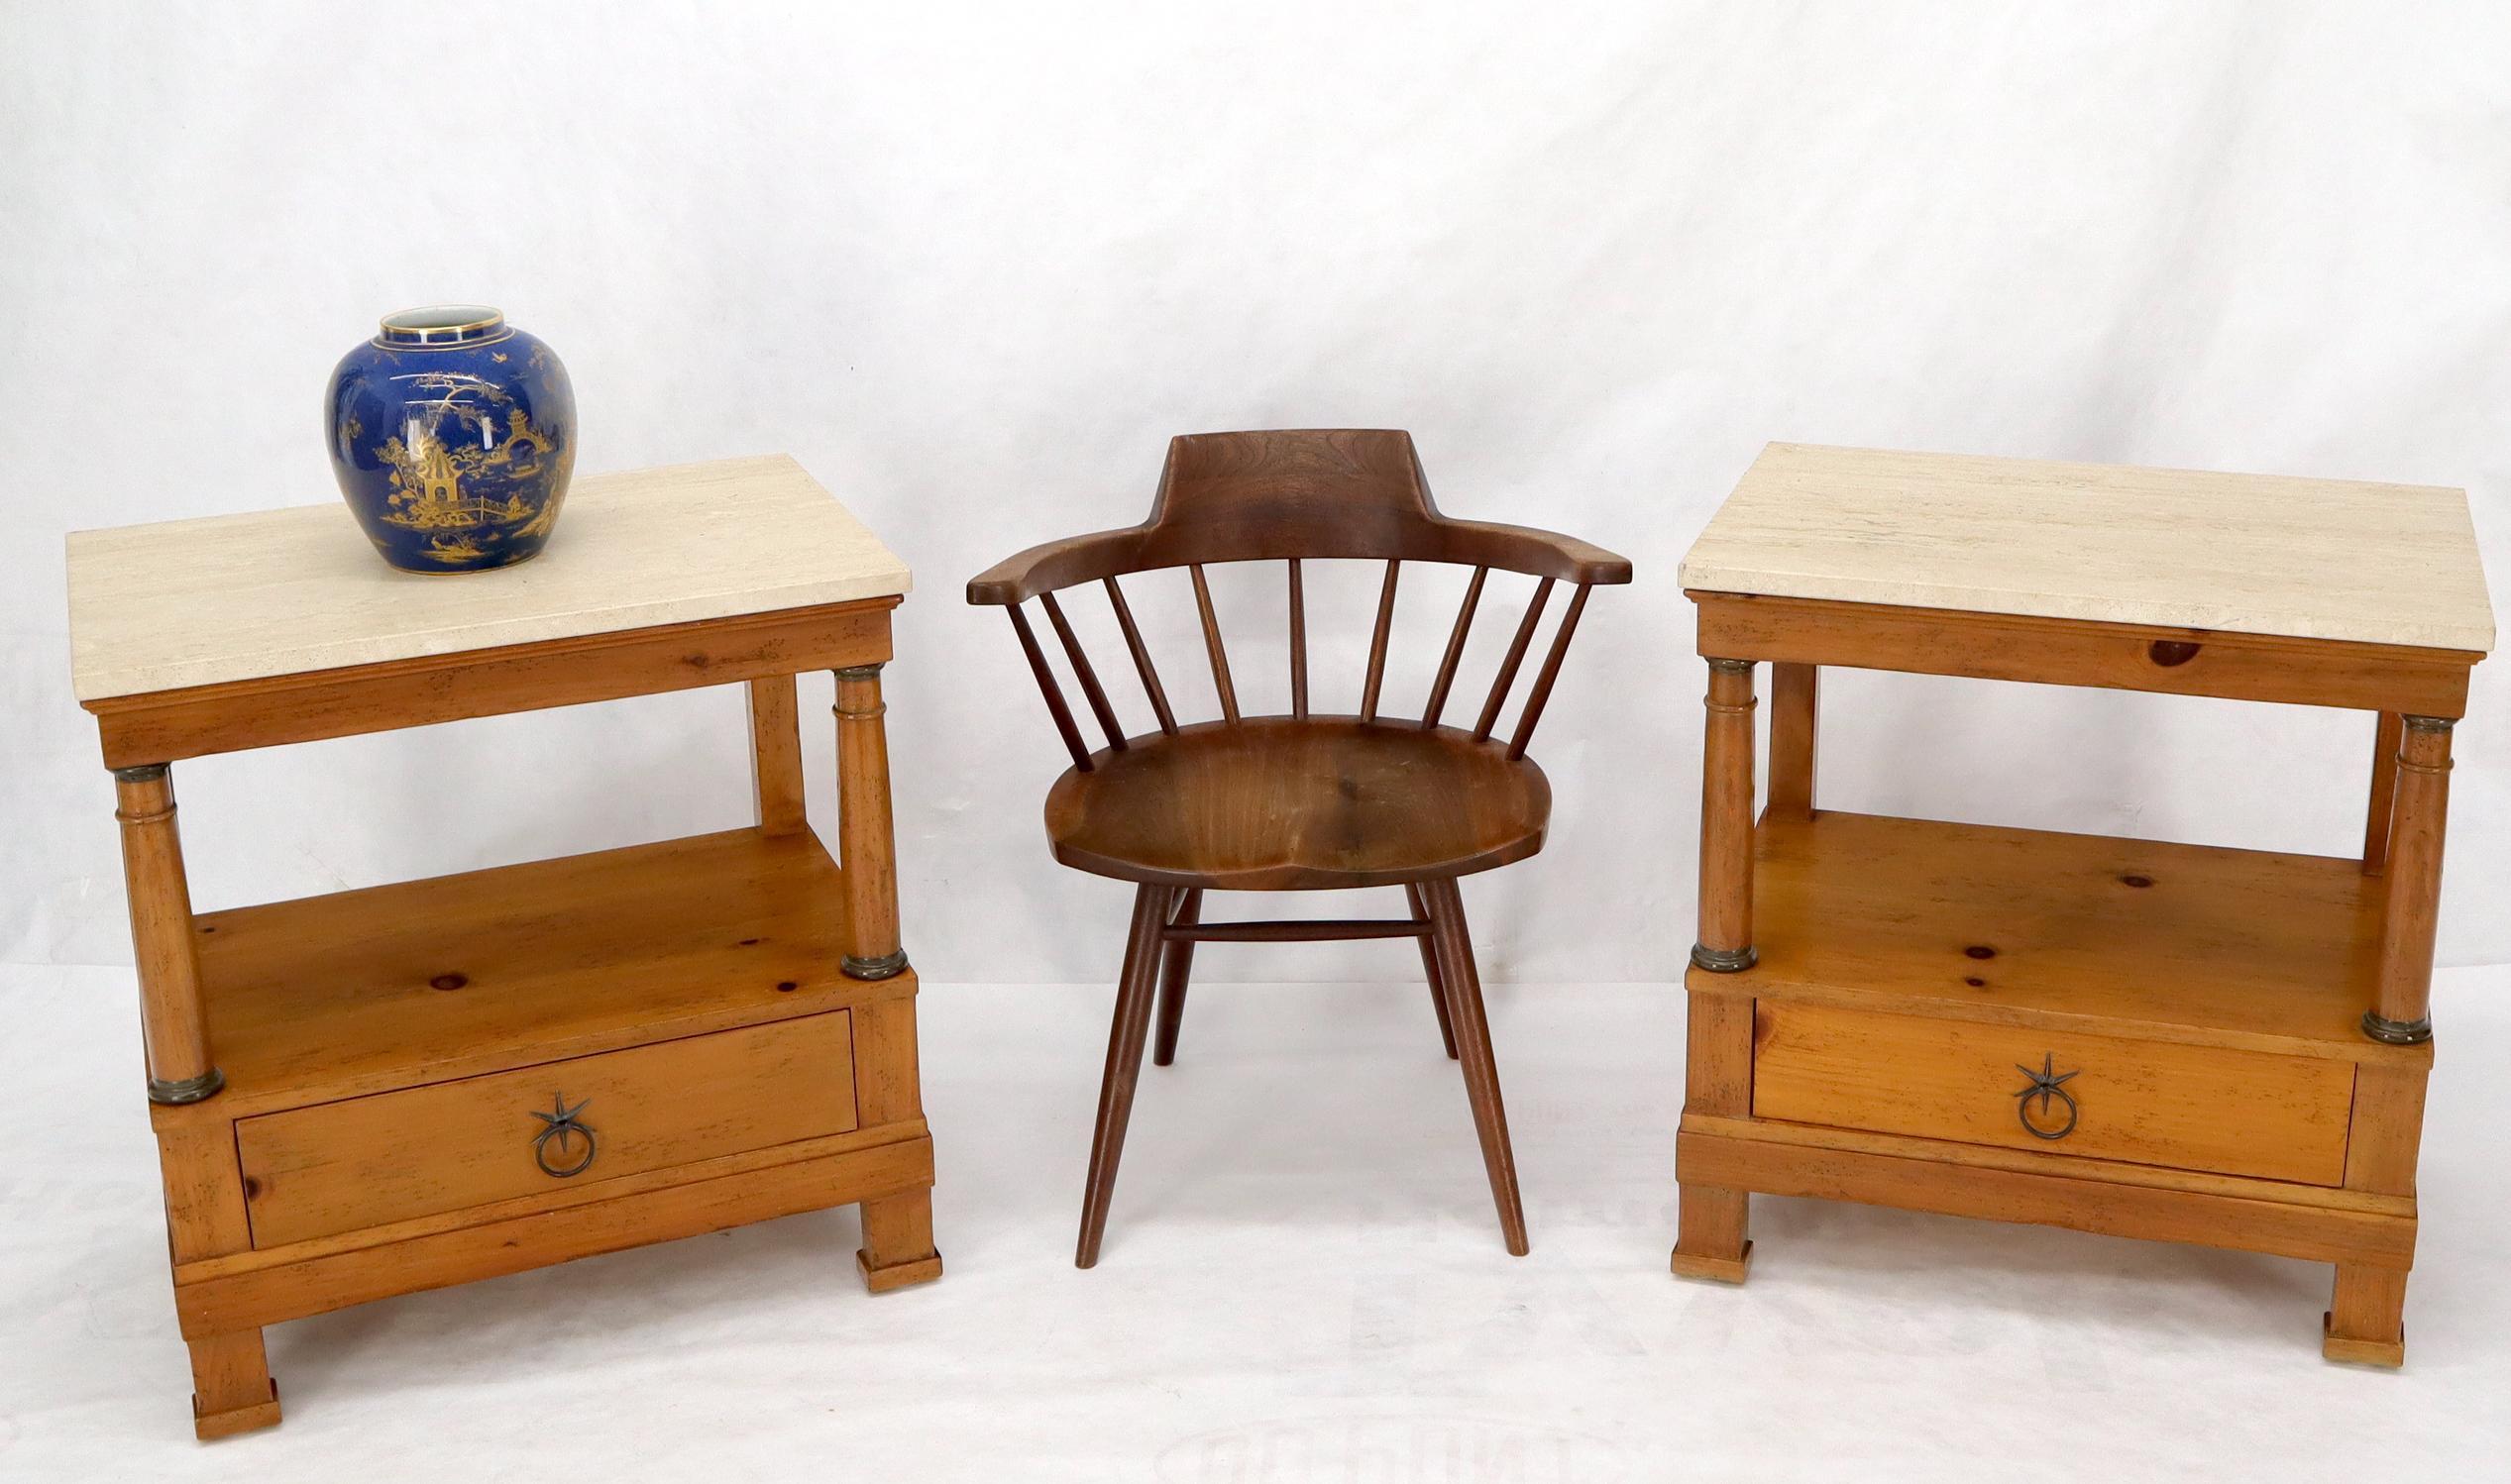 Pair of stylish floating on pillars travertine marble top one drawer knotted pine end tables night stands.